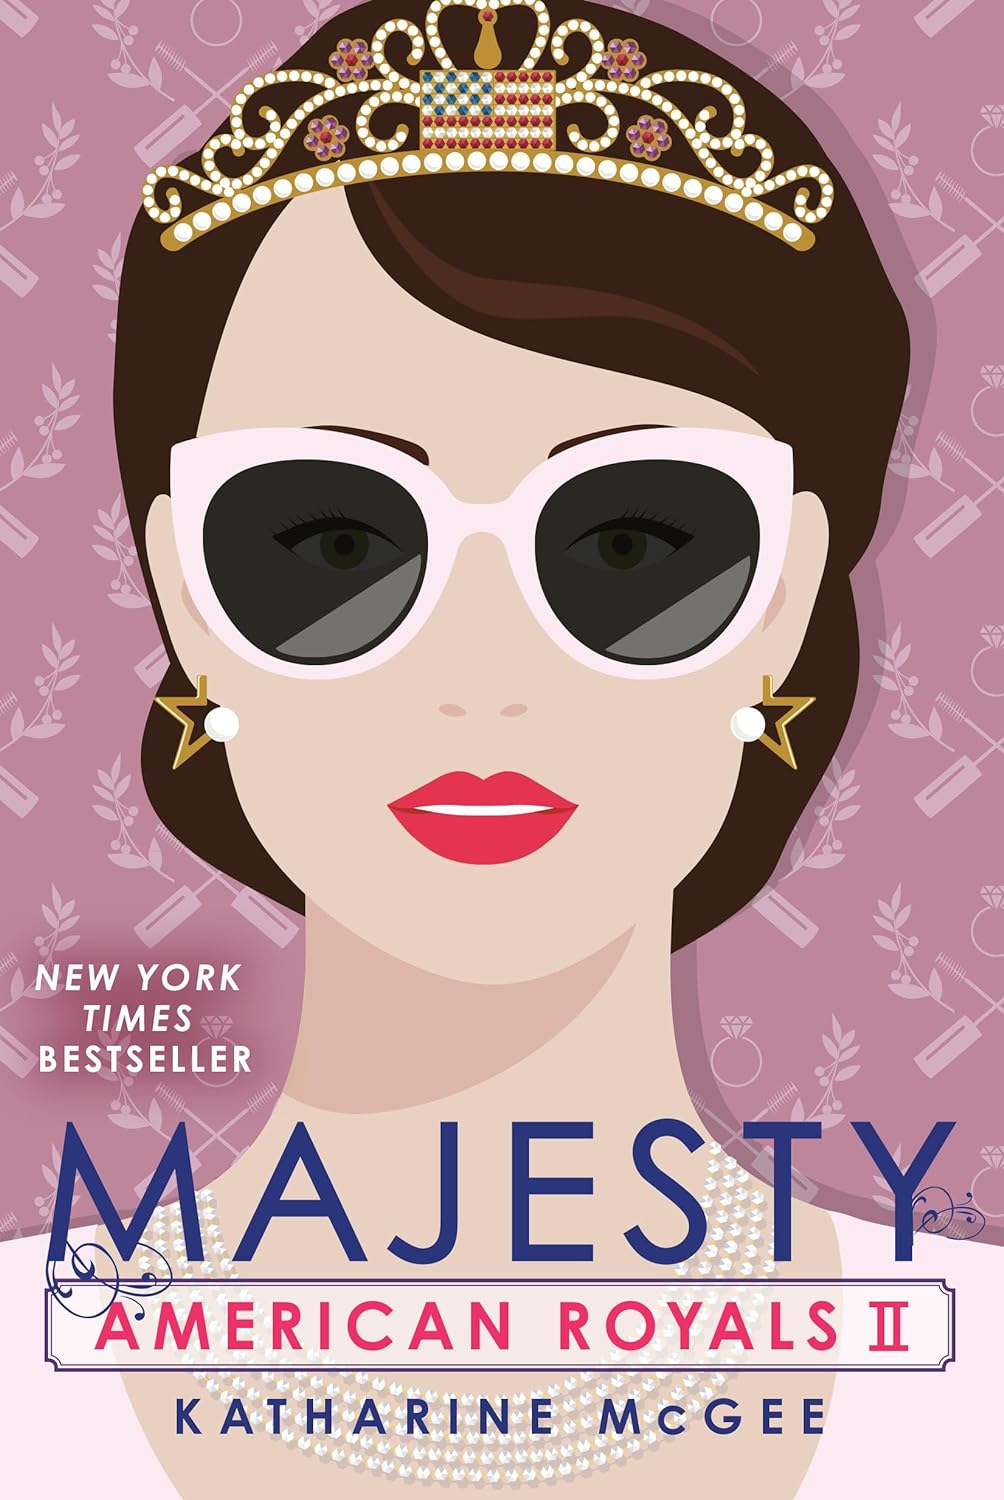 Majesty: American Royals II - Katharine McGee (Pre-Loved)